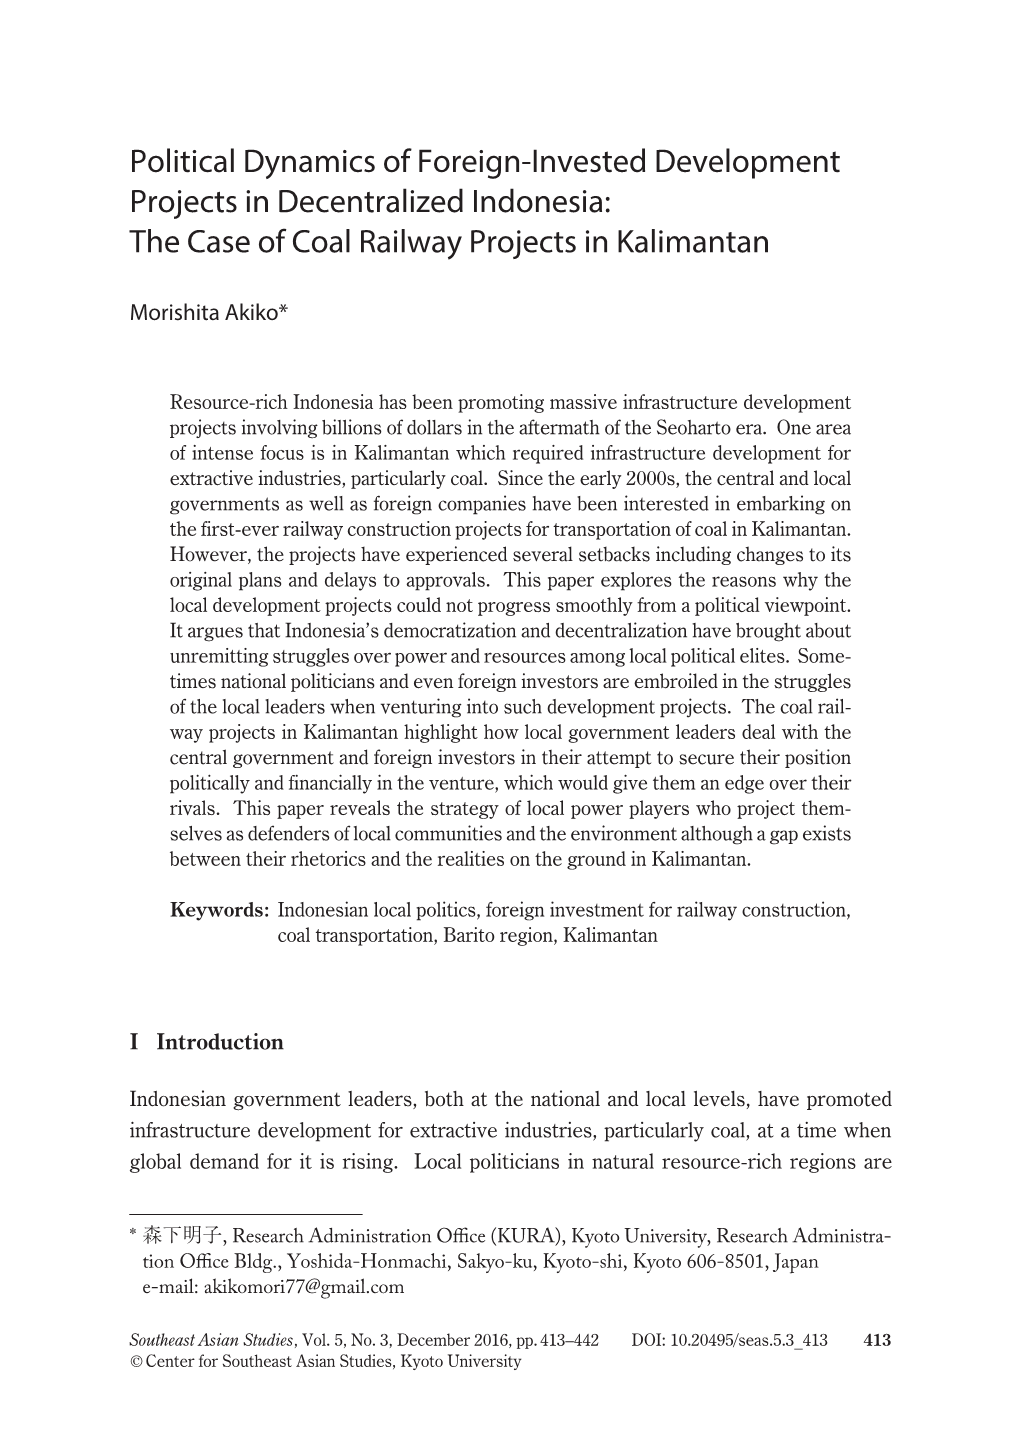 The Case of Coal Railway Projects in Kalimantan